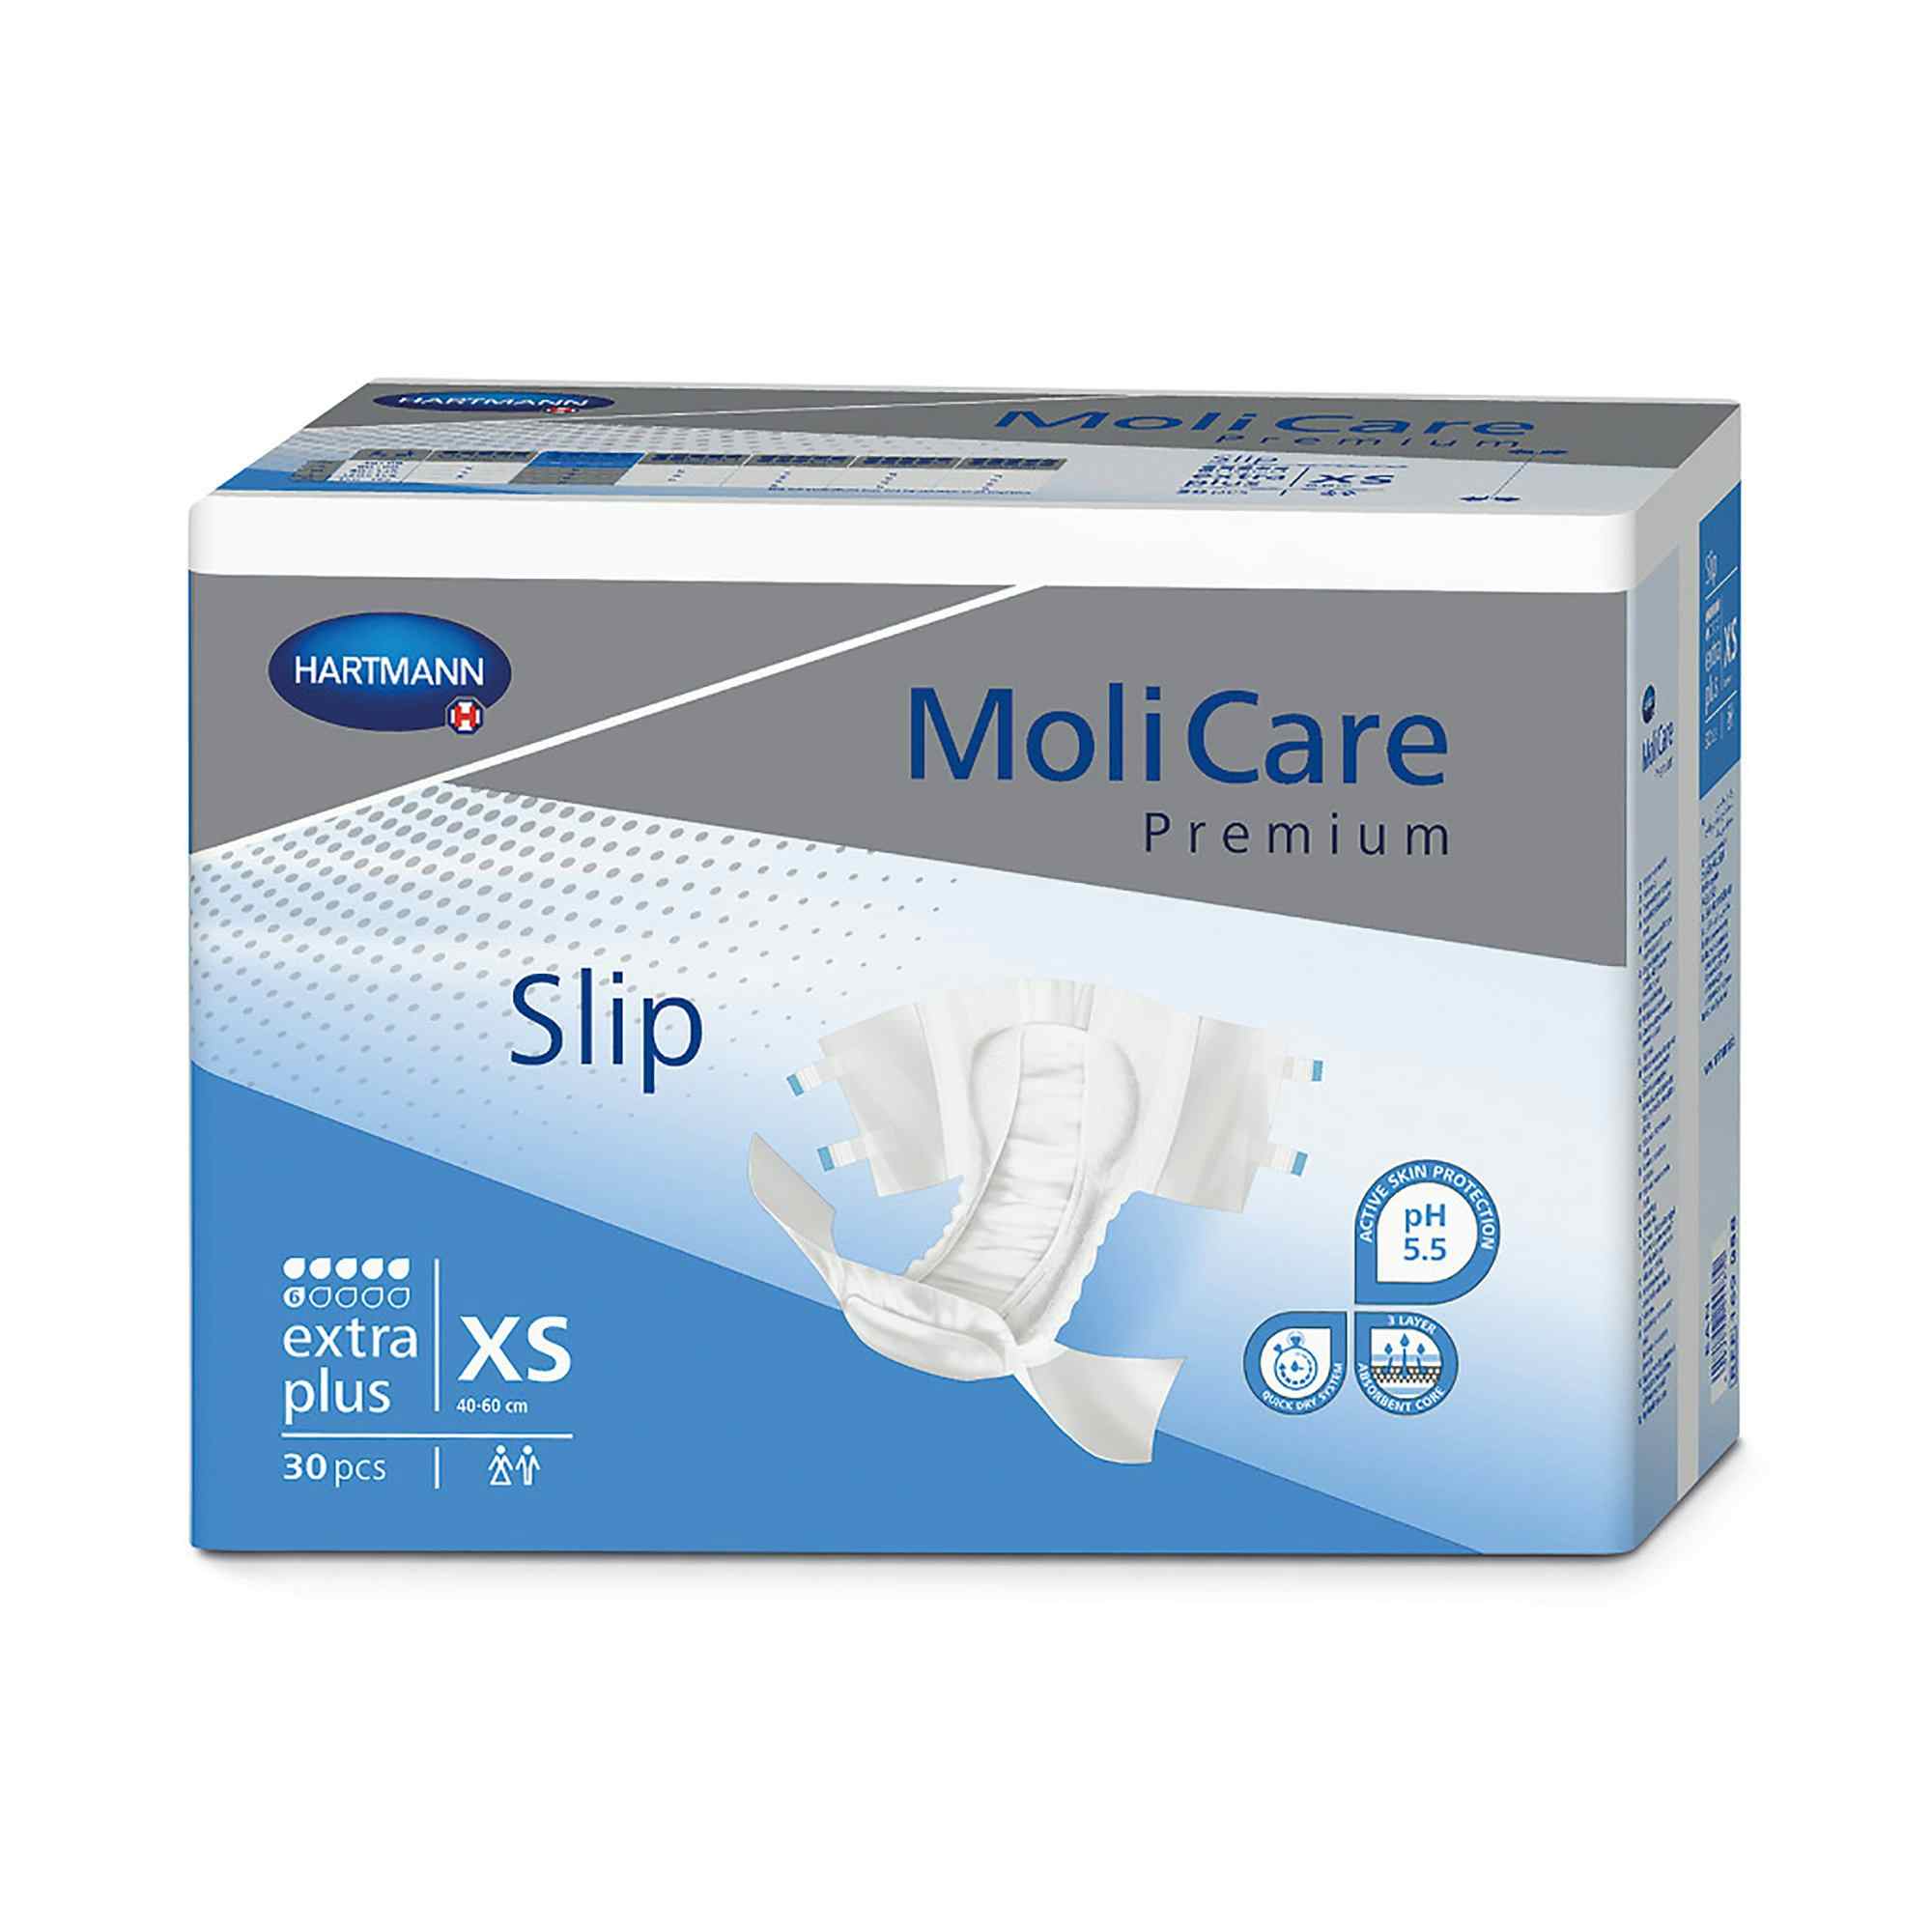 MoliCare Premium Slip Extra Plus Brief Adult Diapers with Tabs, Heavy Absorbency, 169248, X-Small (16-24") - Case of 120